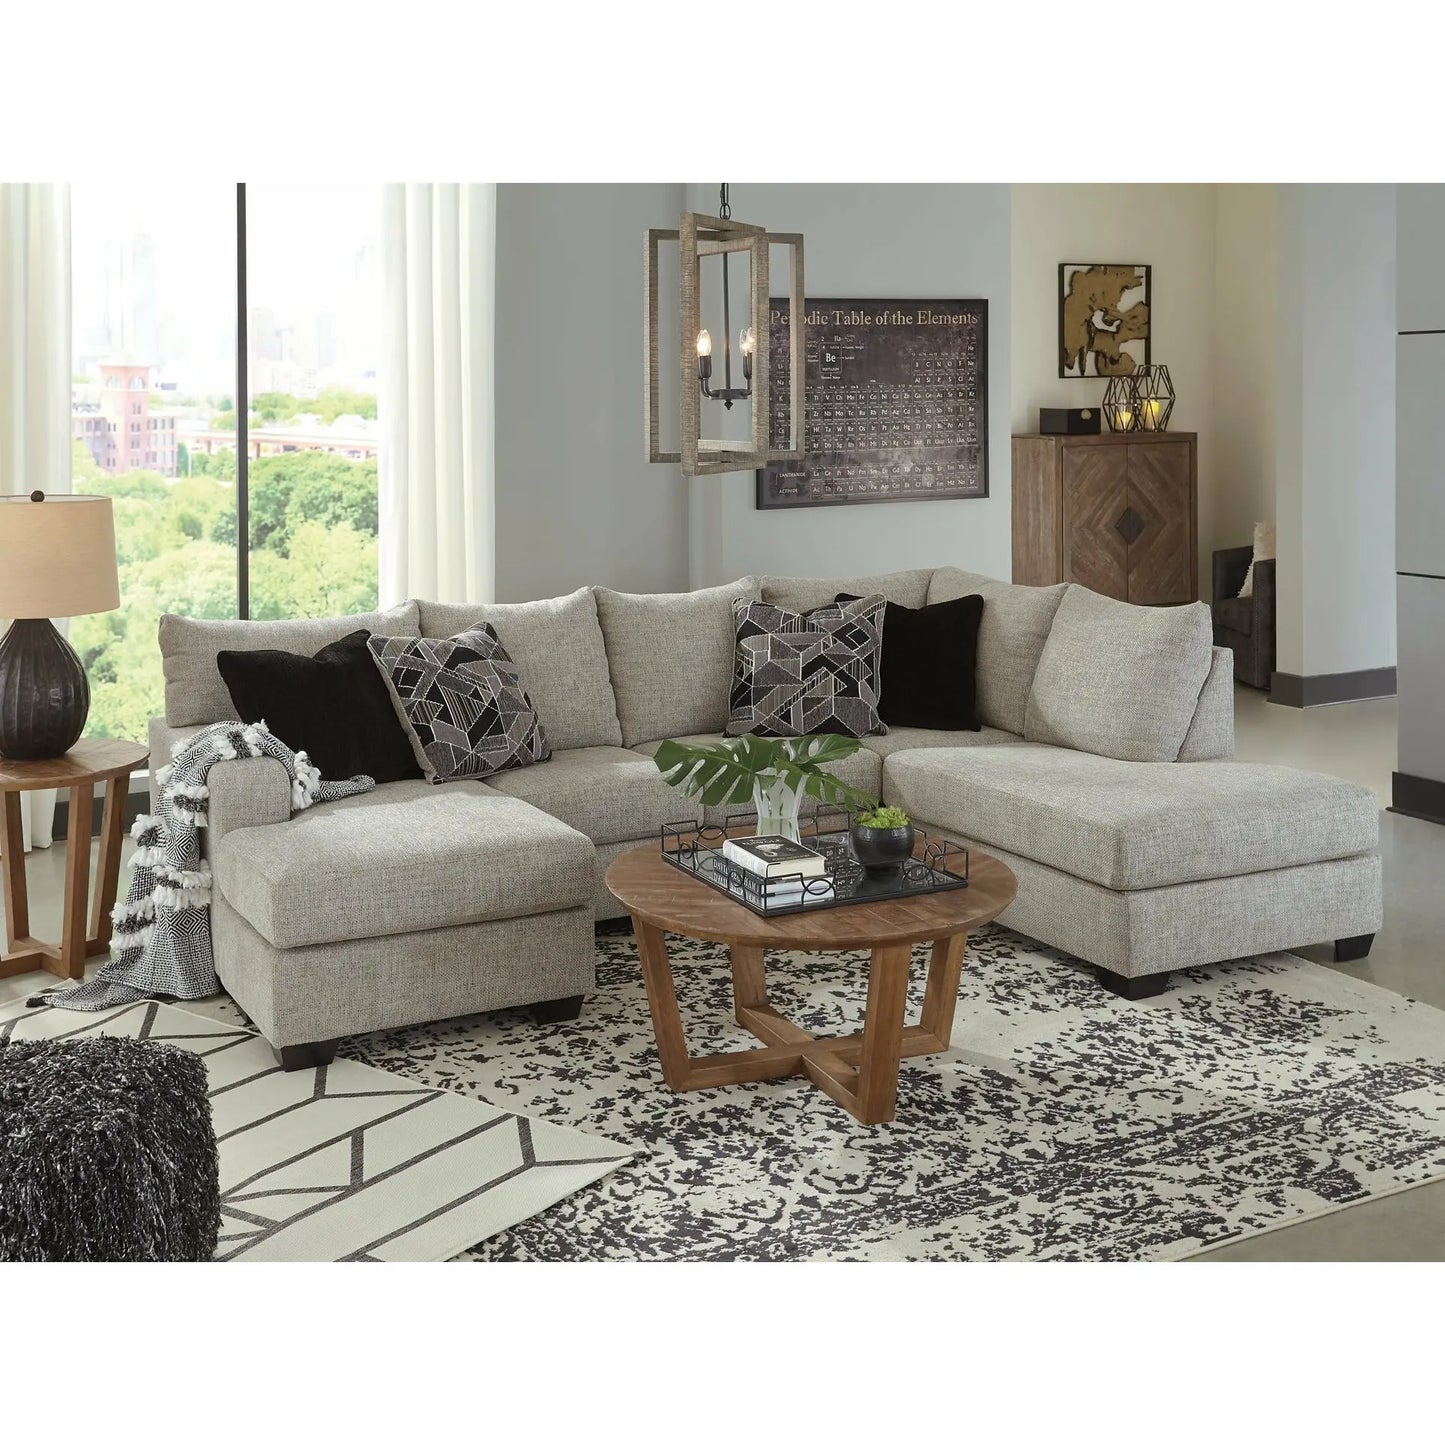 Megginson 2-Piece Sectional with Chaise SOFA